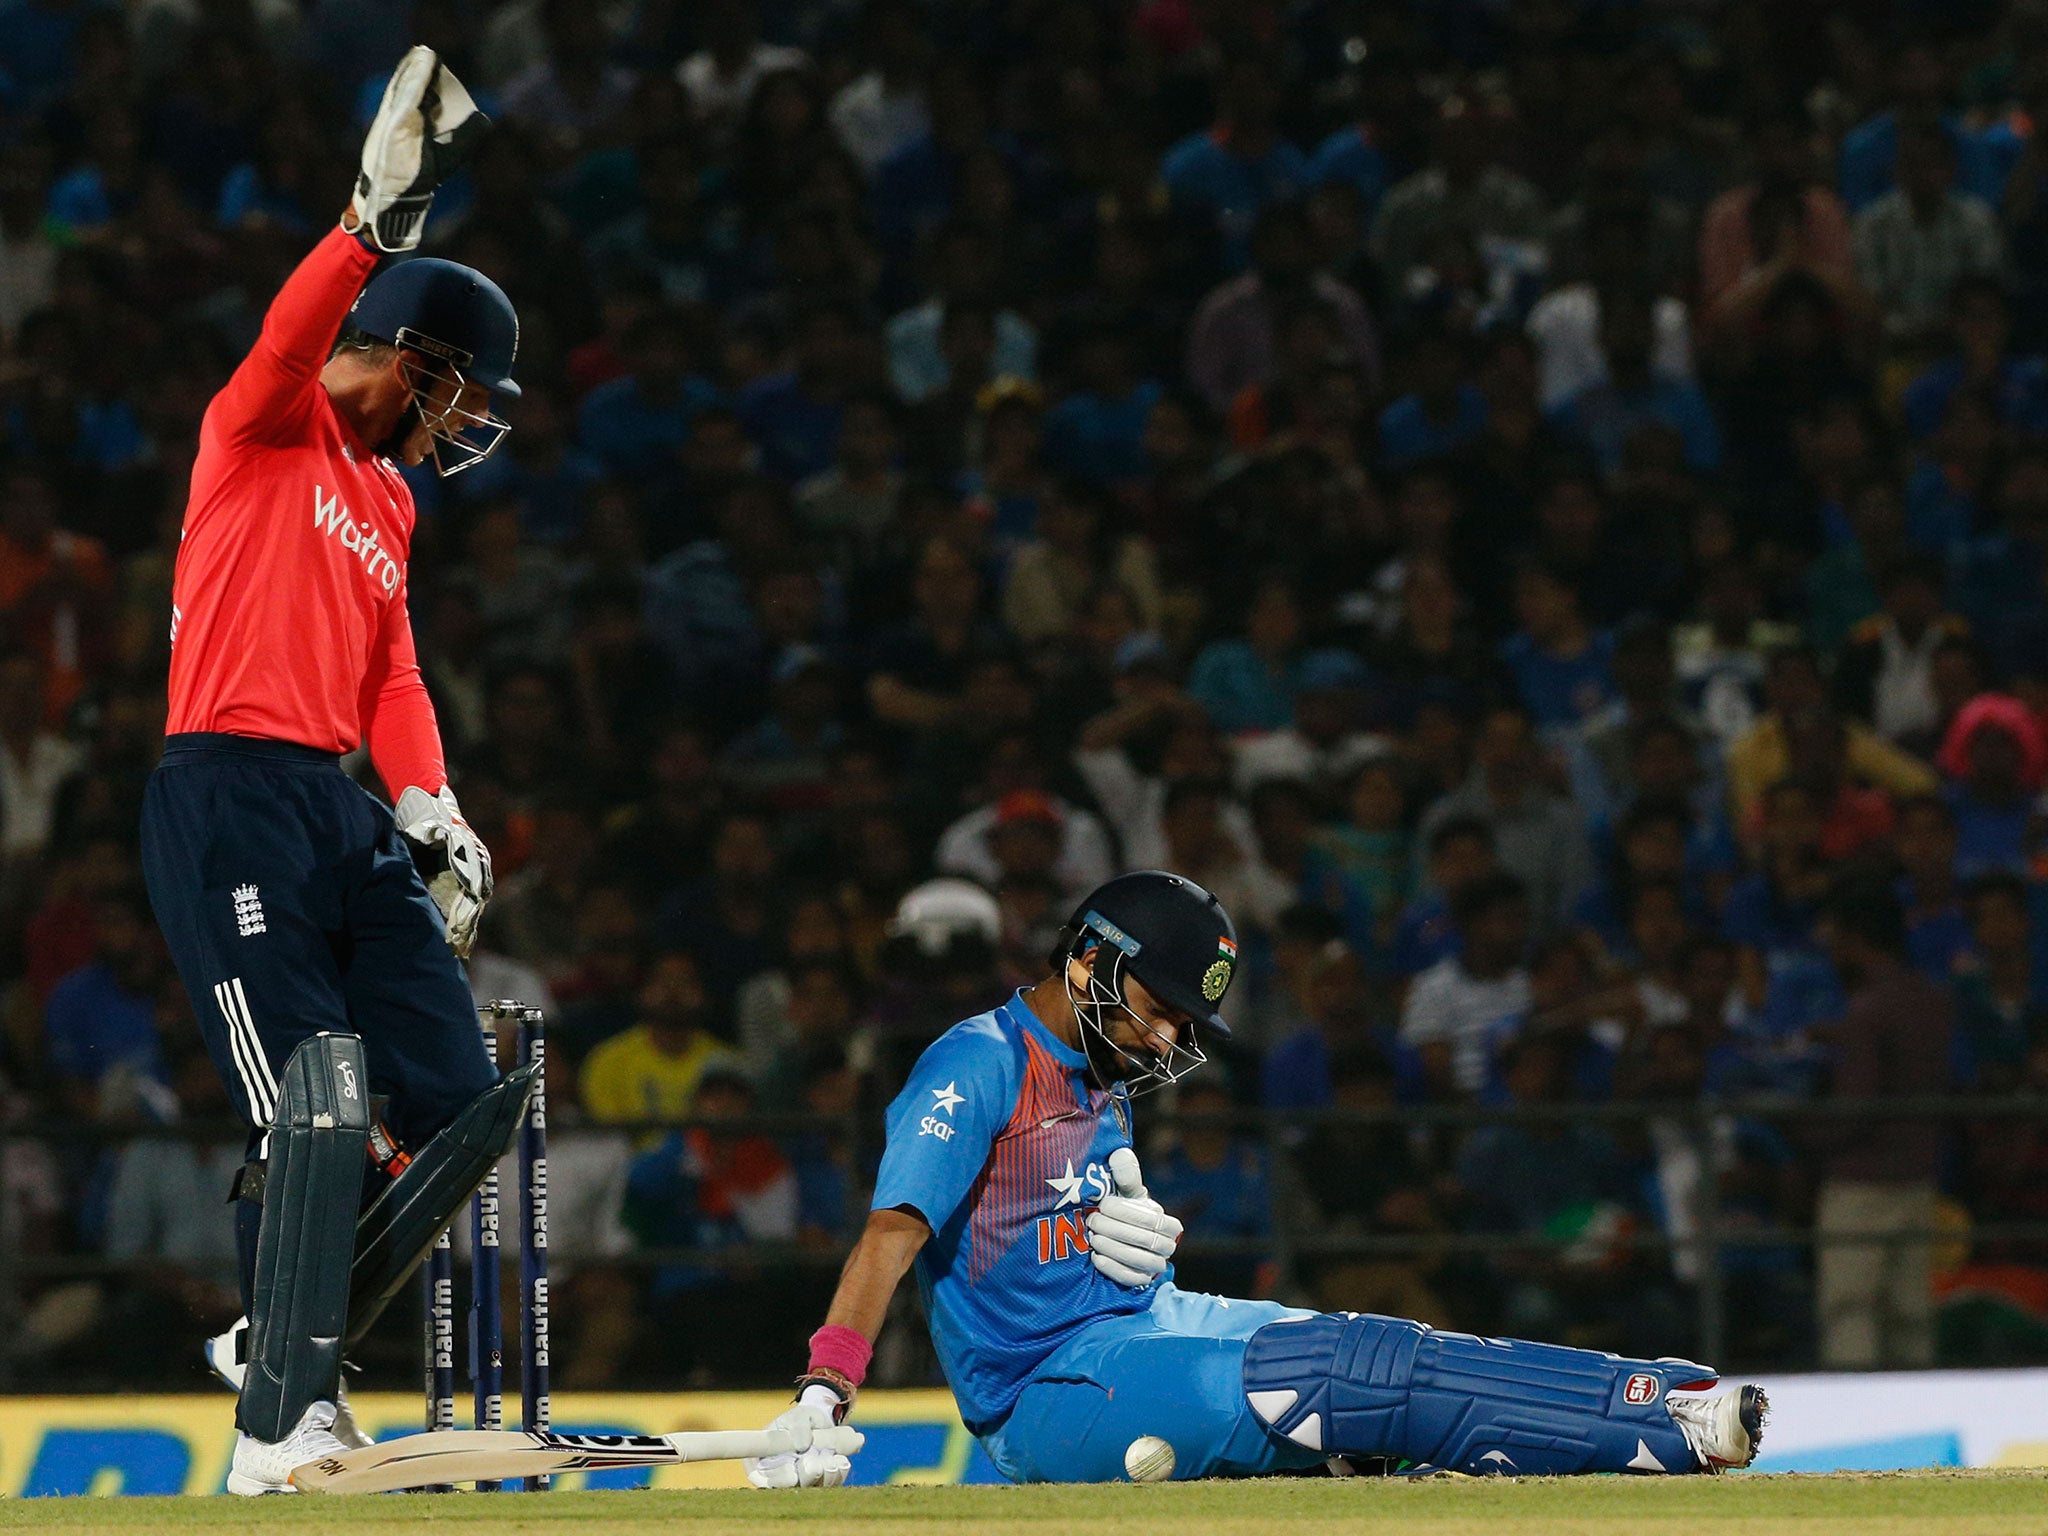 England appeal unsuccessfully against India's Yuvraj Singh in Sunday's match